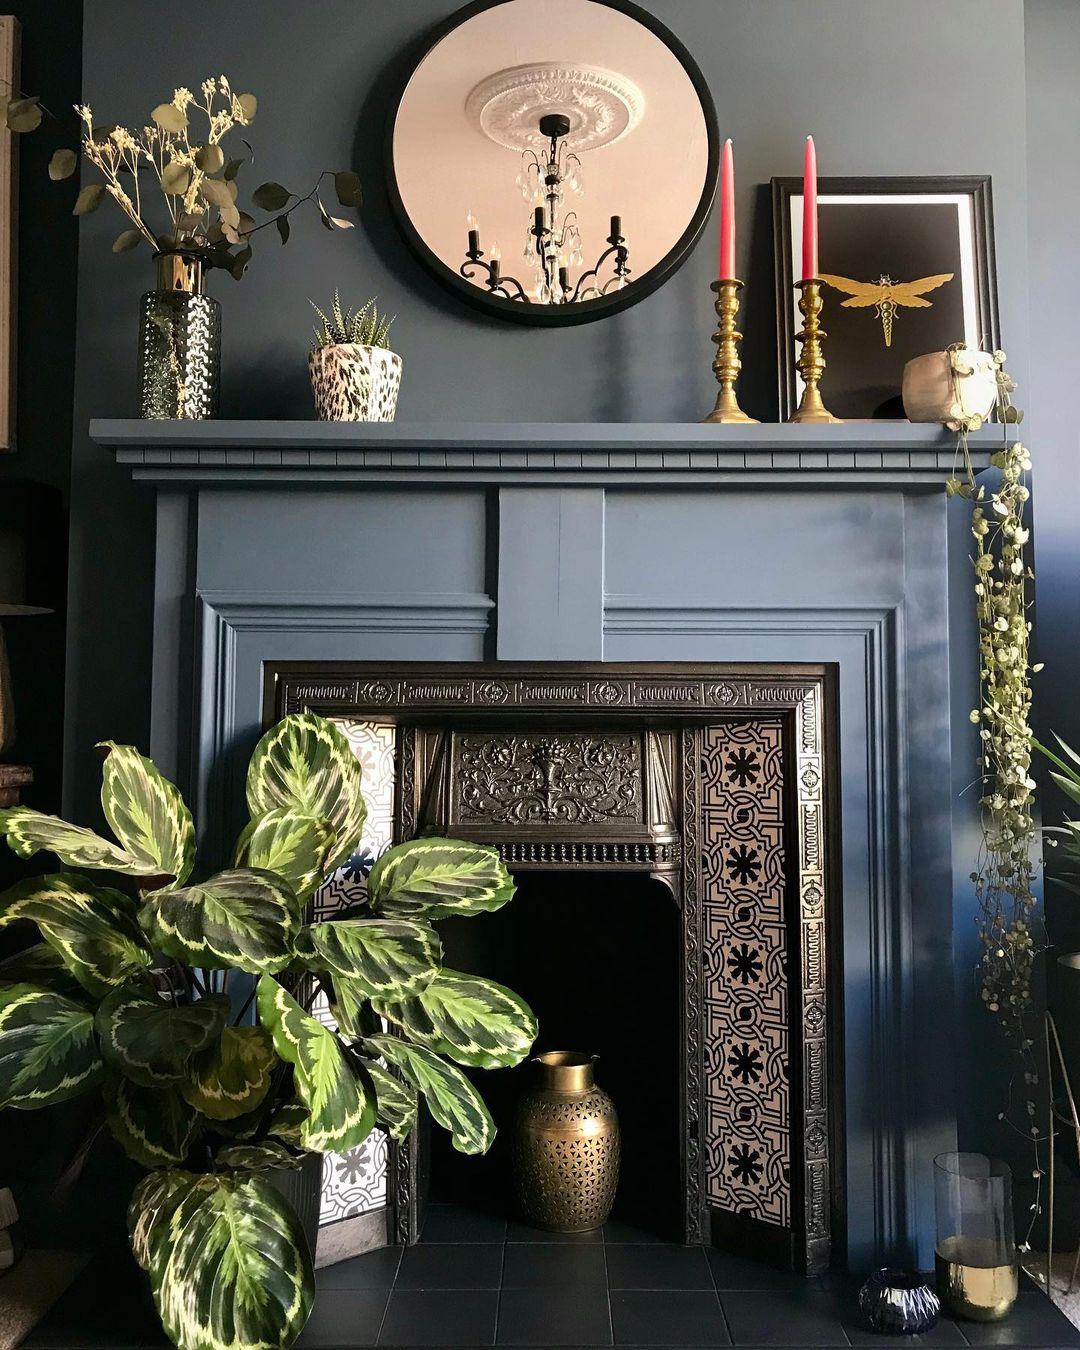 A Colorful Edwardian Home with a Dramatic Decorative Fireplace